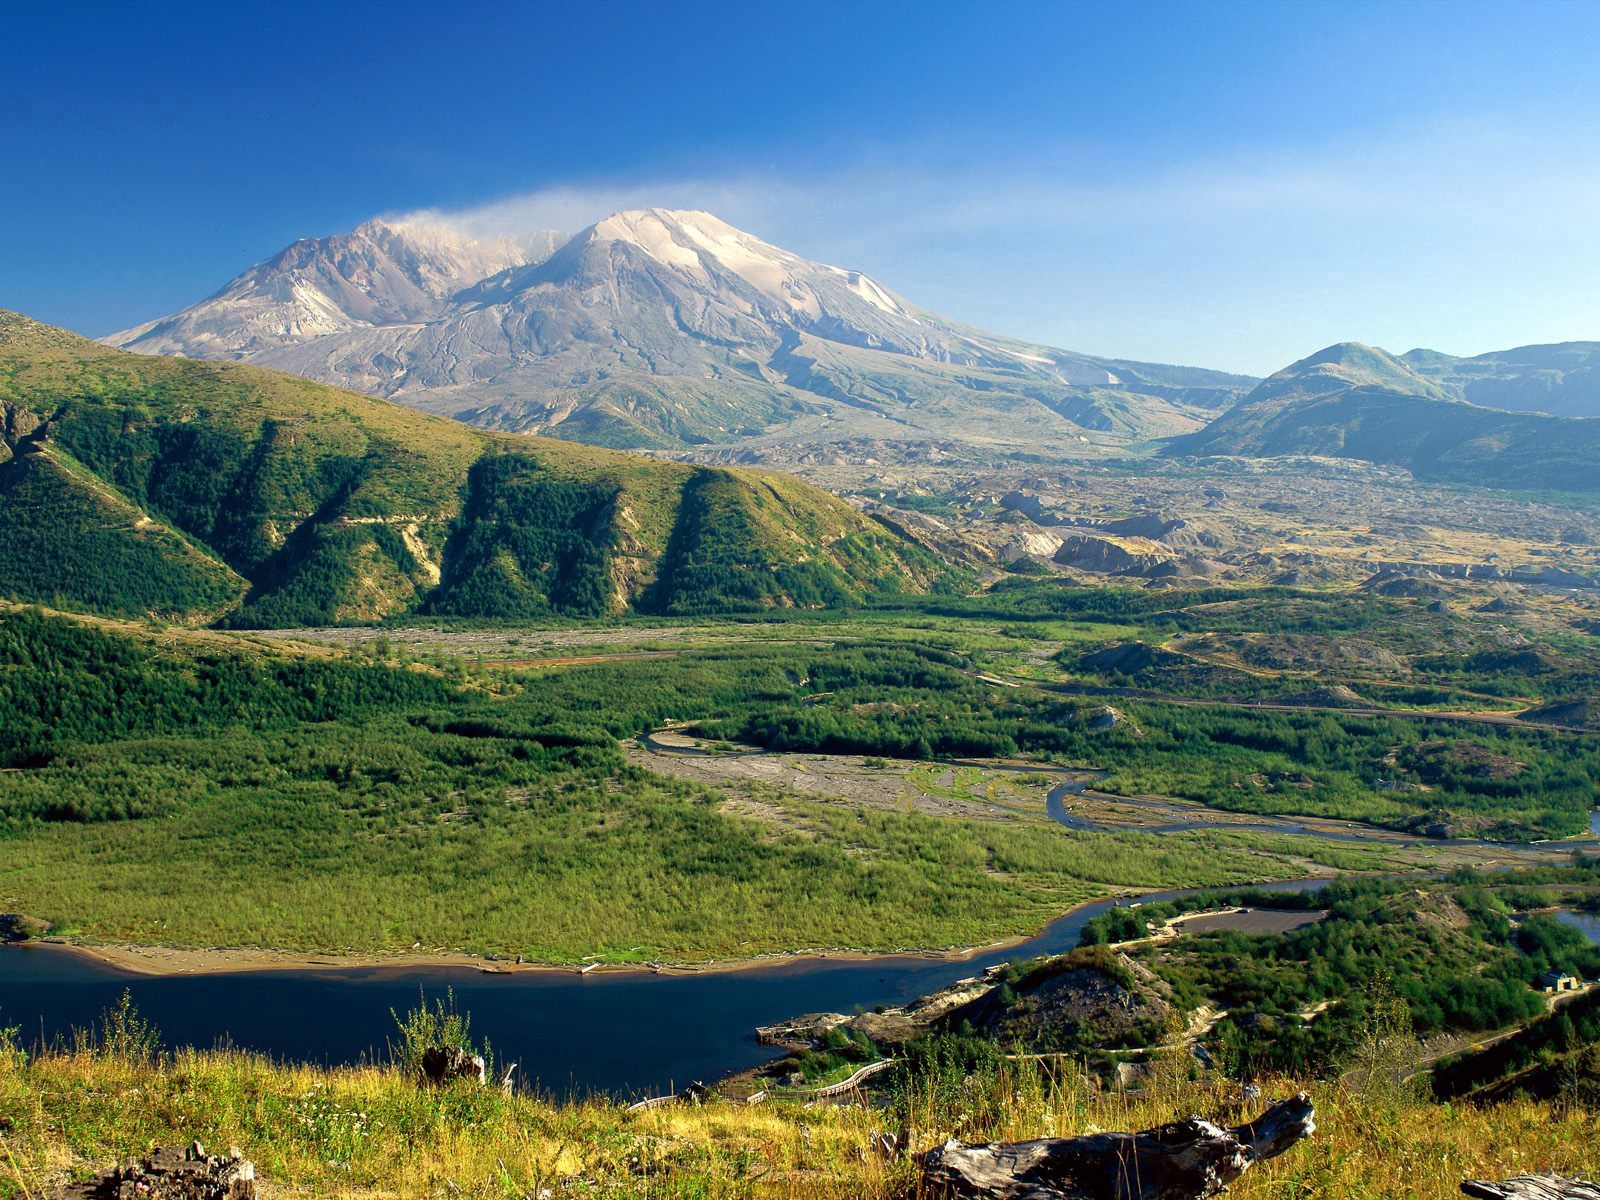 valley, nature, mountains, washington, mount st helens lock screen backgrounds